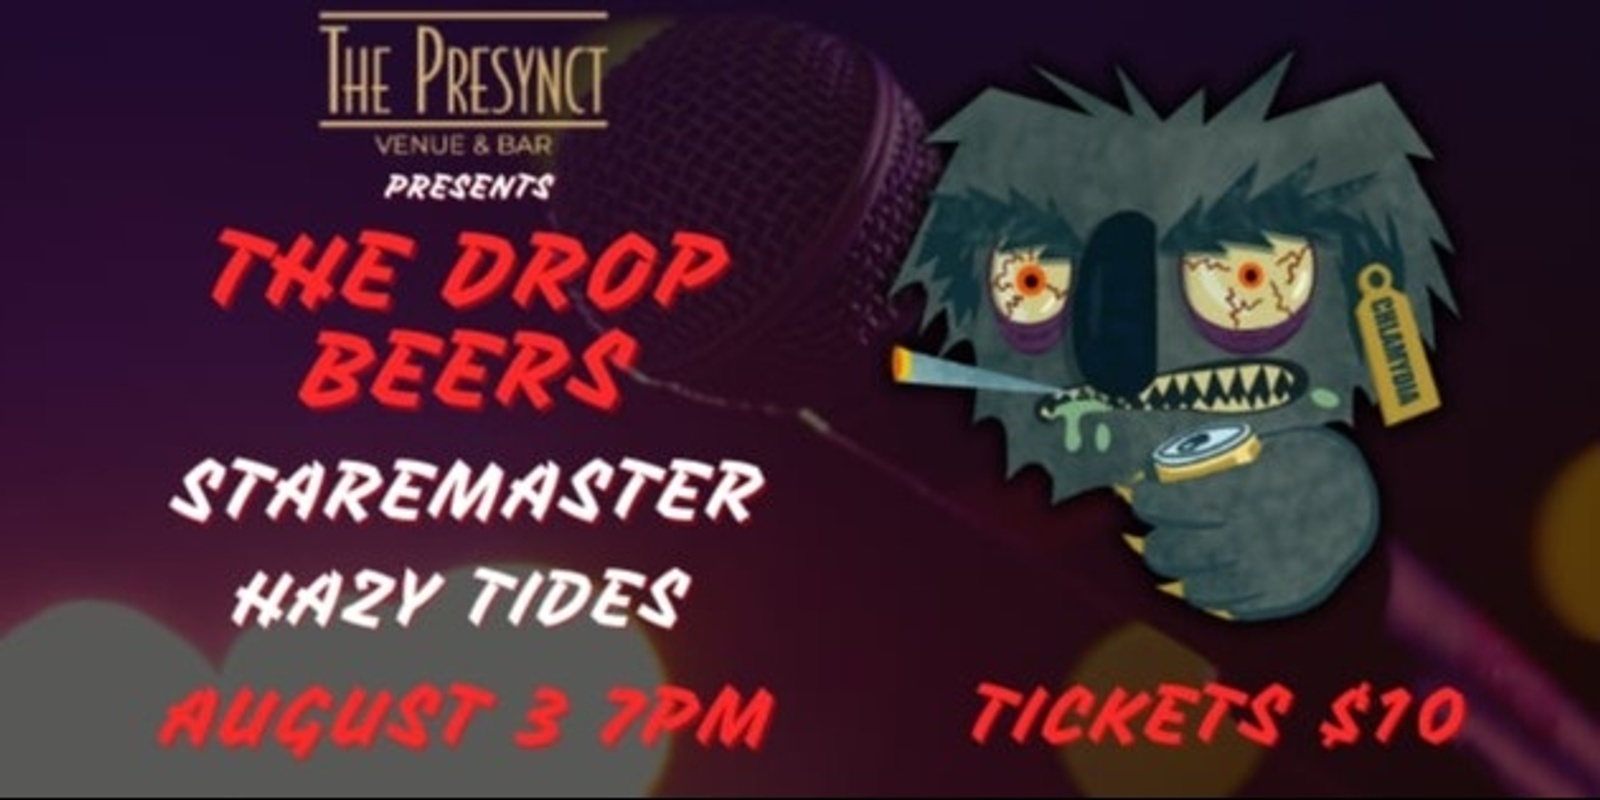 Banner image for Party with The Drop Beers & their mates